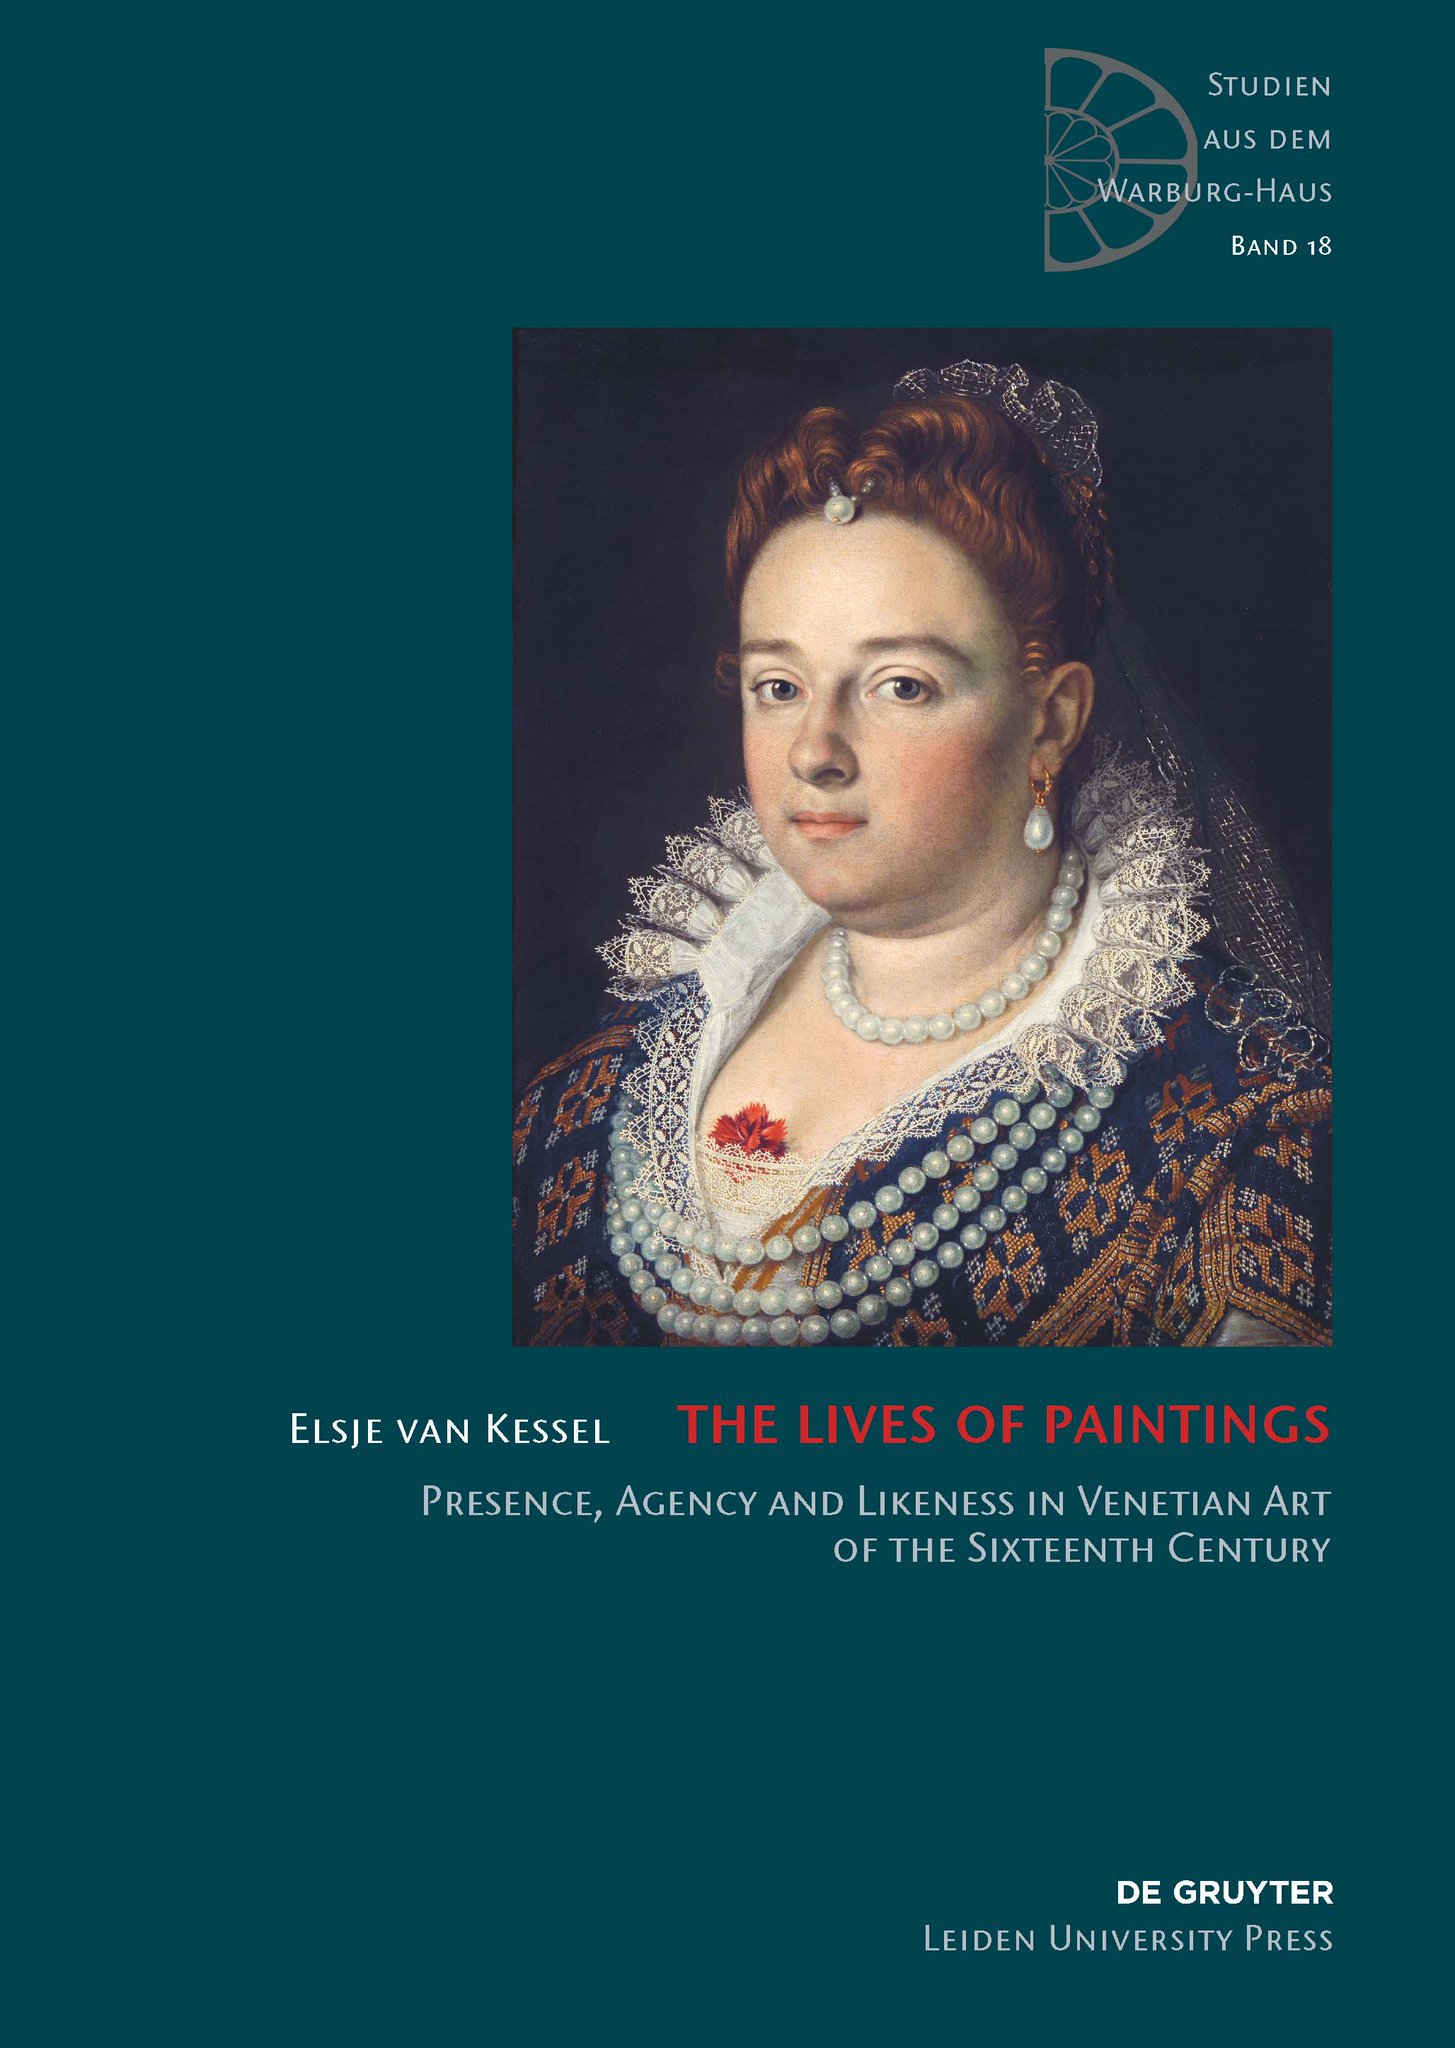 Neuerscheinung: The Lives of Paintings. Presence, Agency and Likeness in Venetian Art of the Sixteenth Century